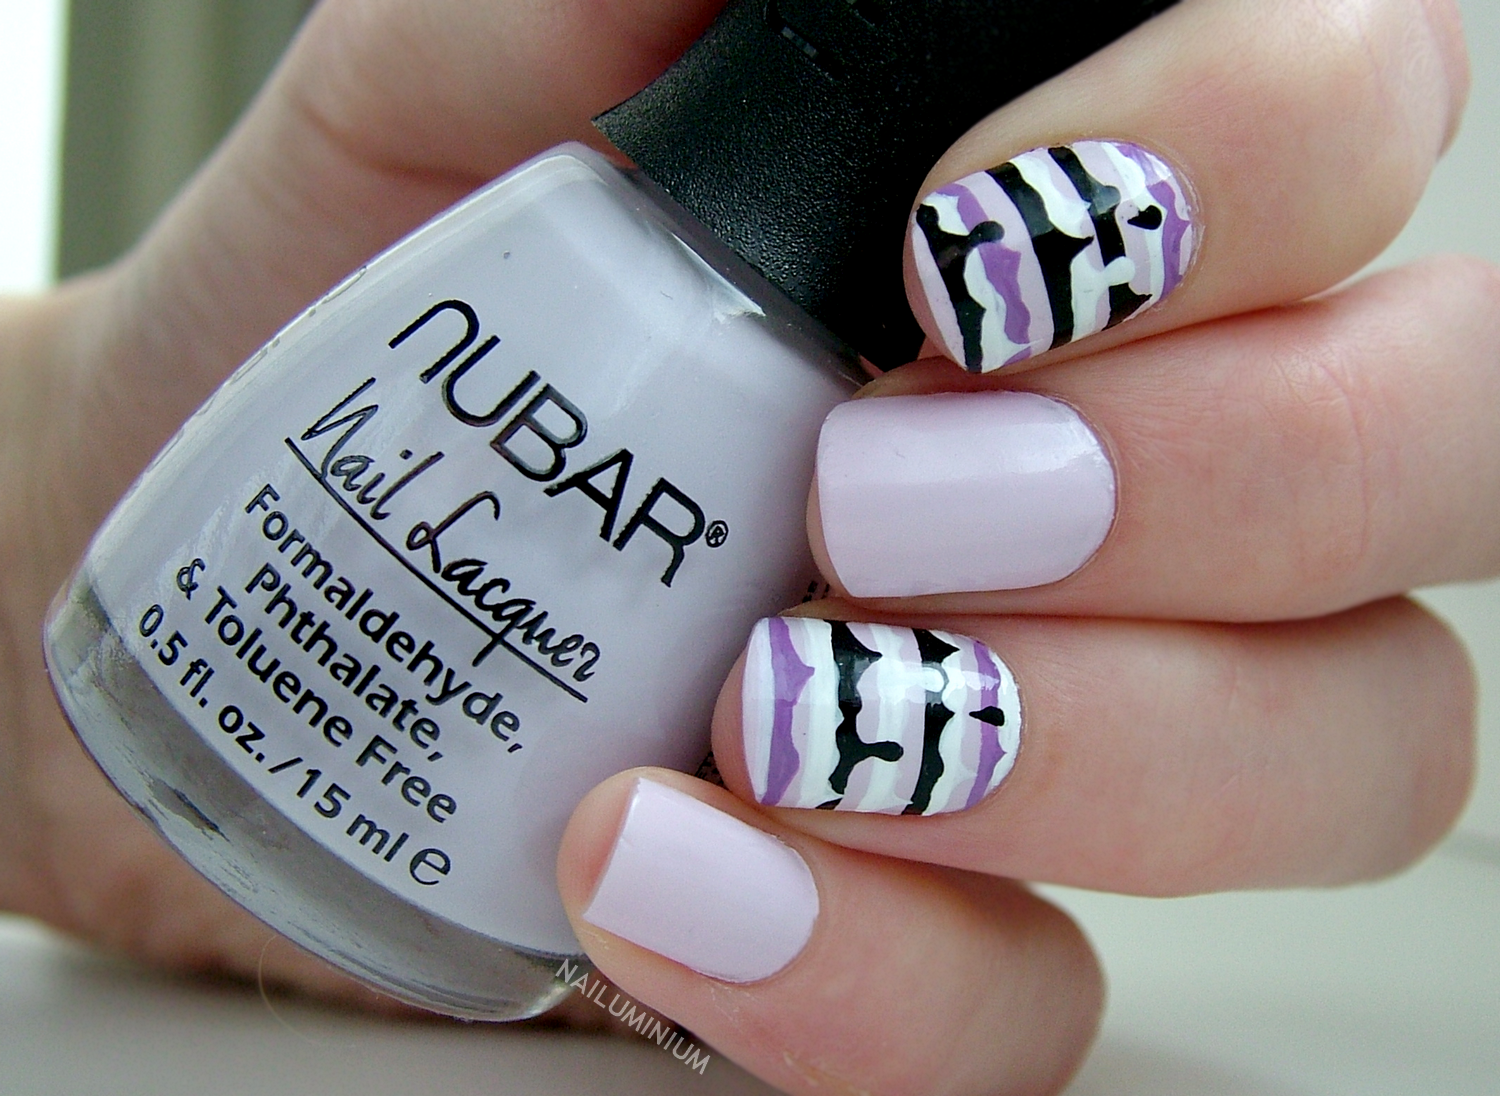 4. Creative Spots and Stripes Nail Art Designs - wide 1